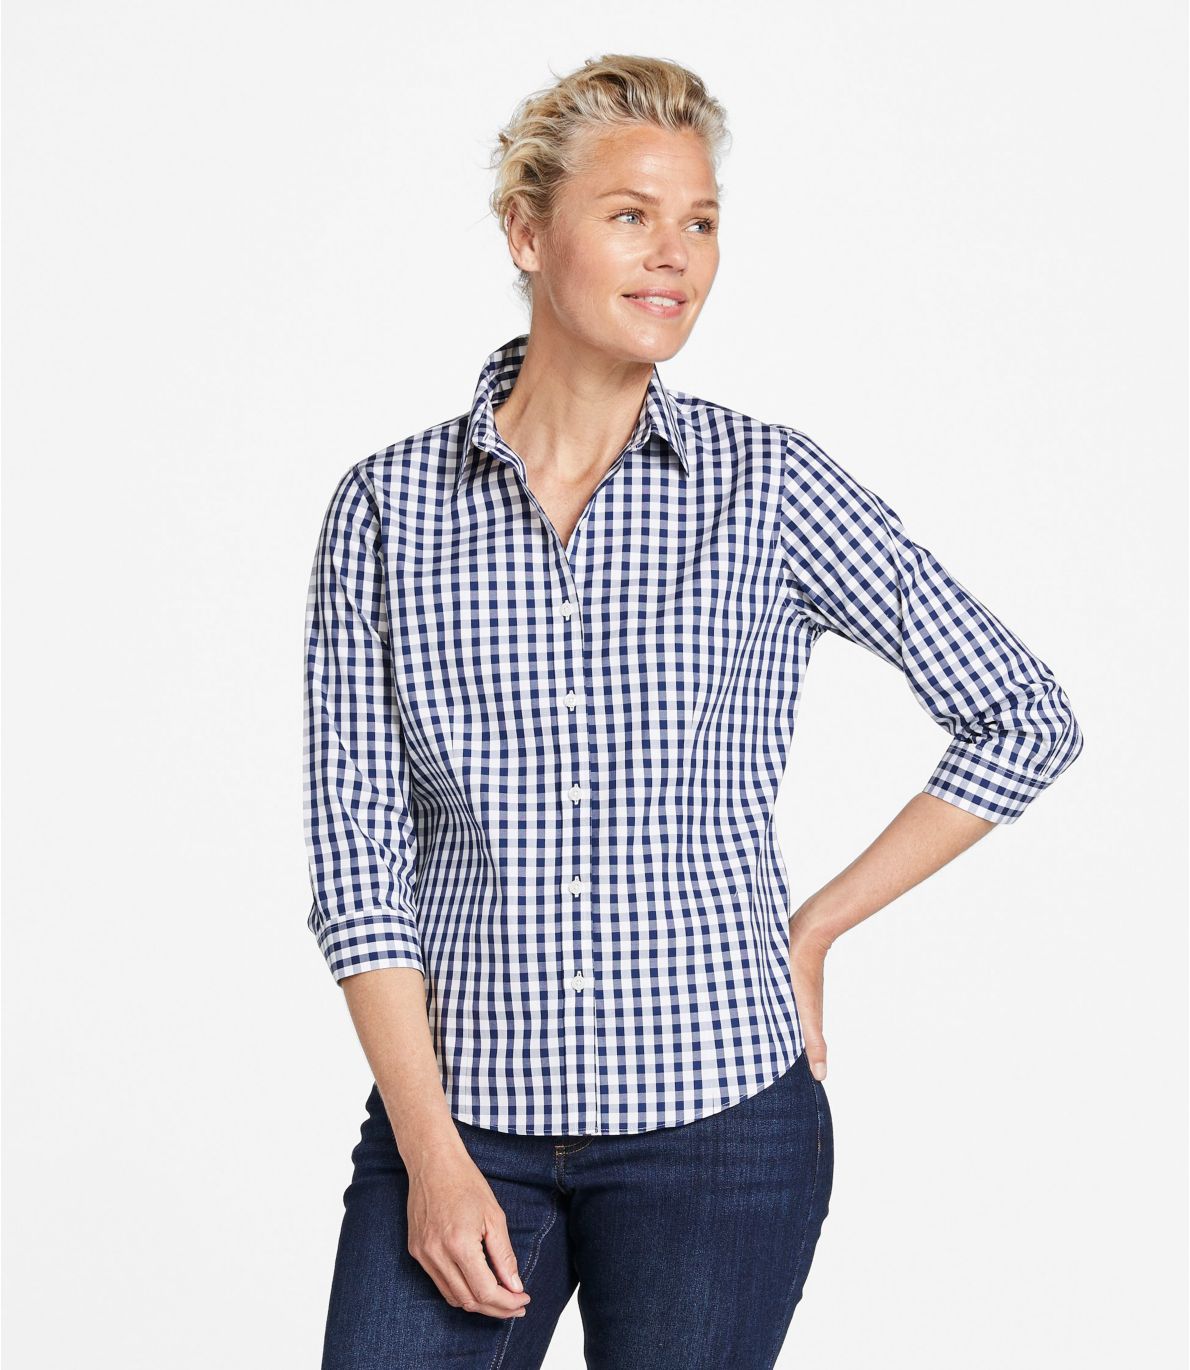 Women's Wrinkle-Free Pinpoint Oxford Shirt, Three-Quarter-Sleeve Slightly Fitted Plaid